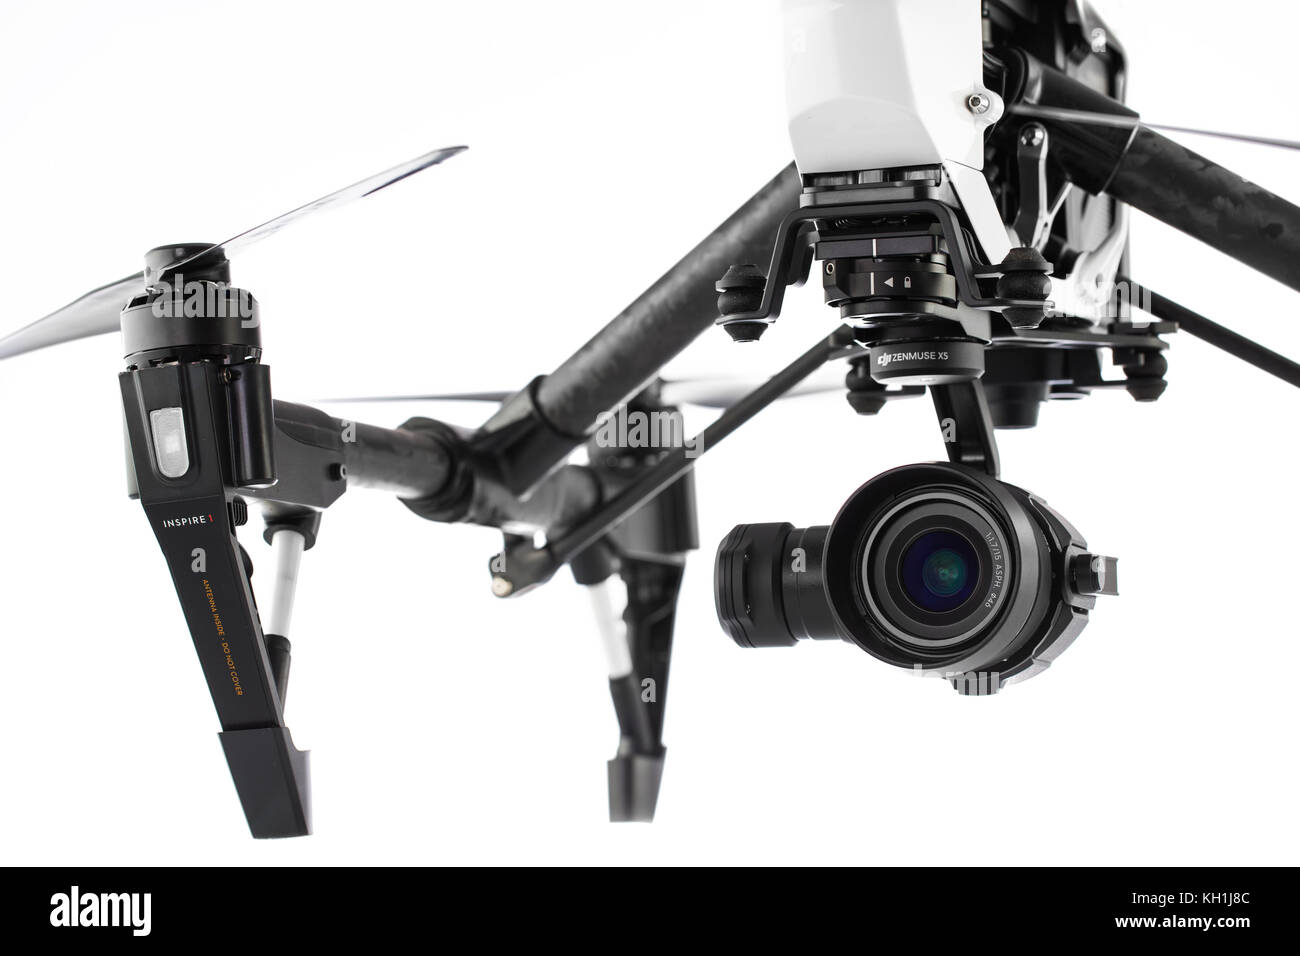 Varna, Bulgaria - April 23 ,2016: Image of DJI Inspire 1 Pro drone UAV quadcopter which shoots 4k video and 16mp still images  and is controlled by wi Stock Photo